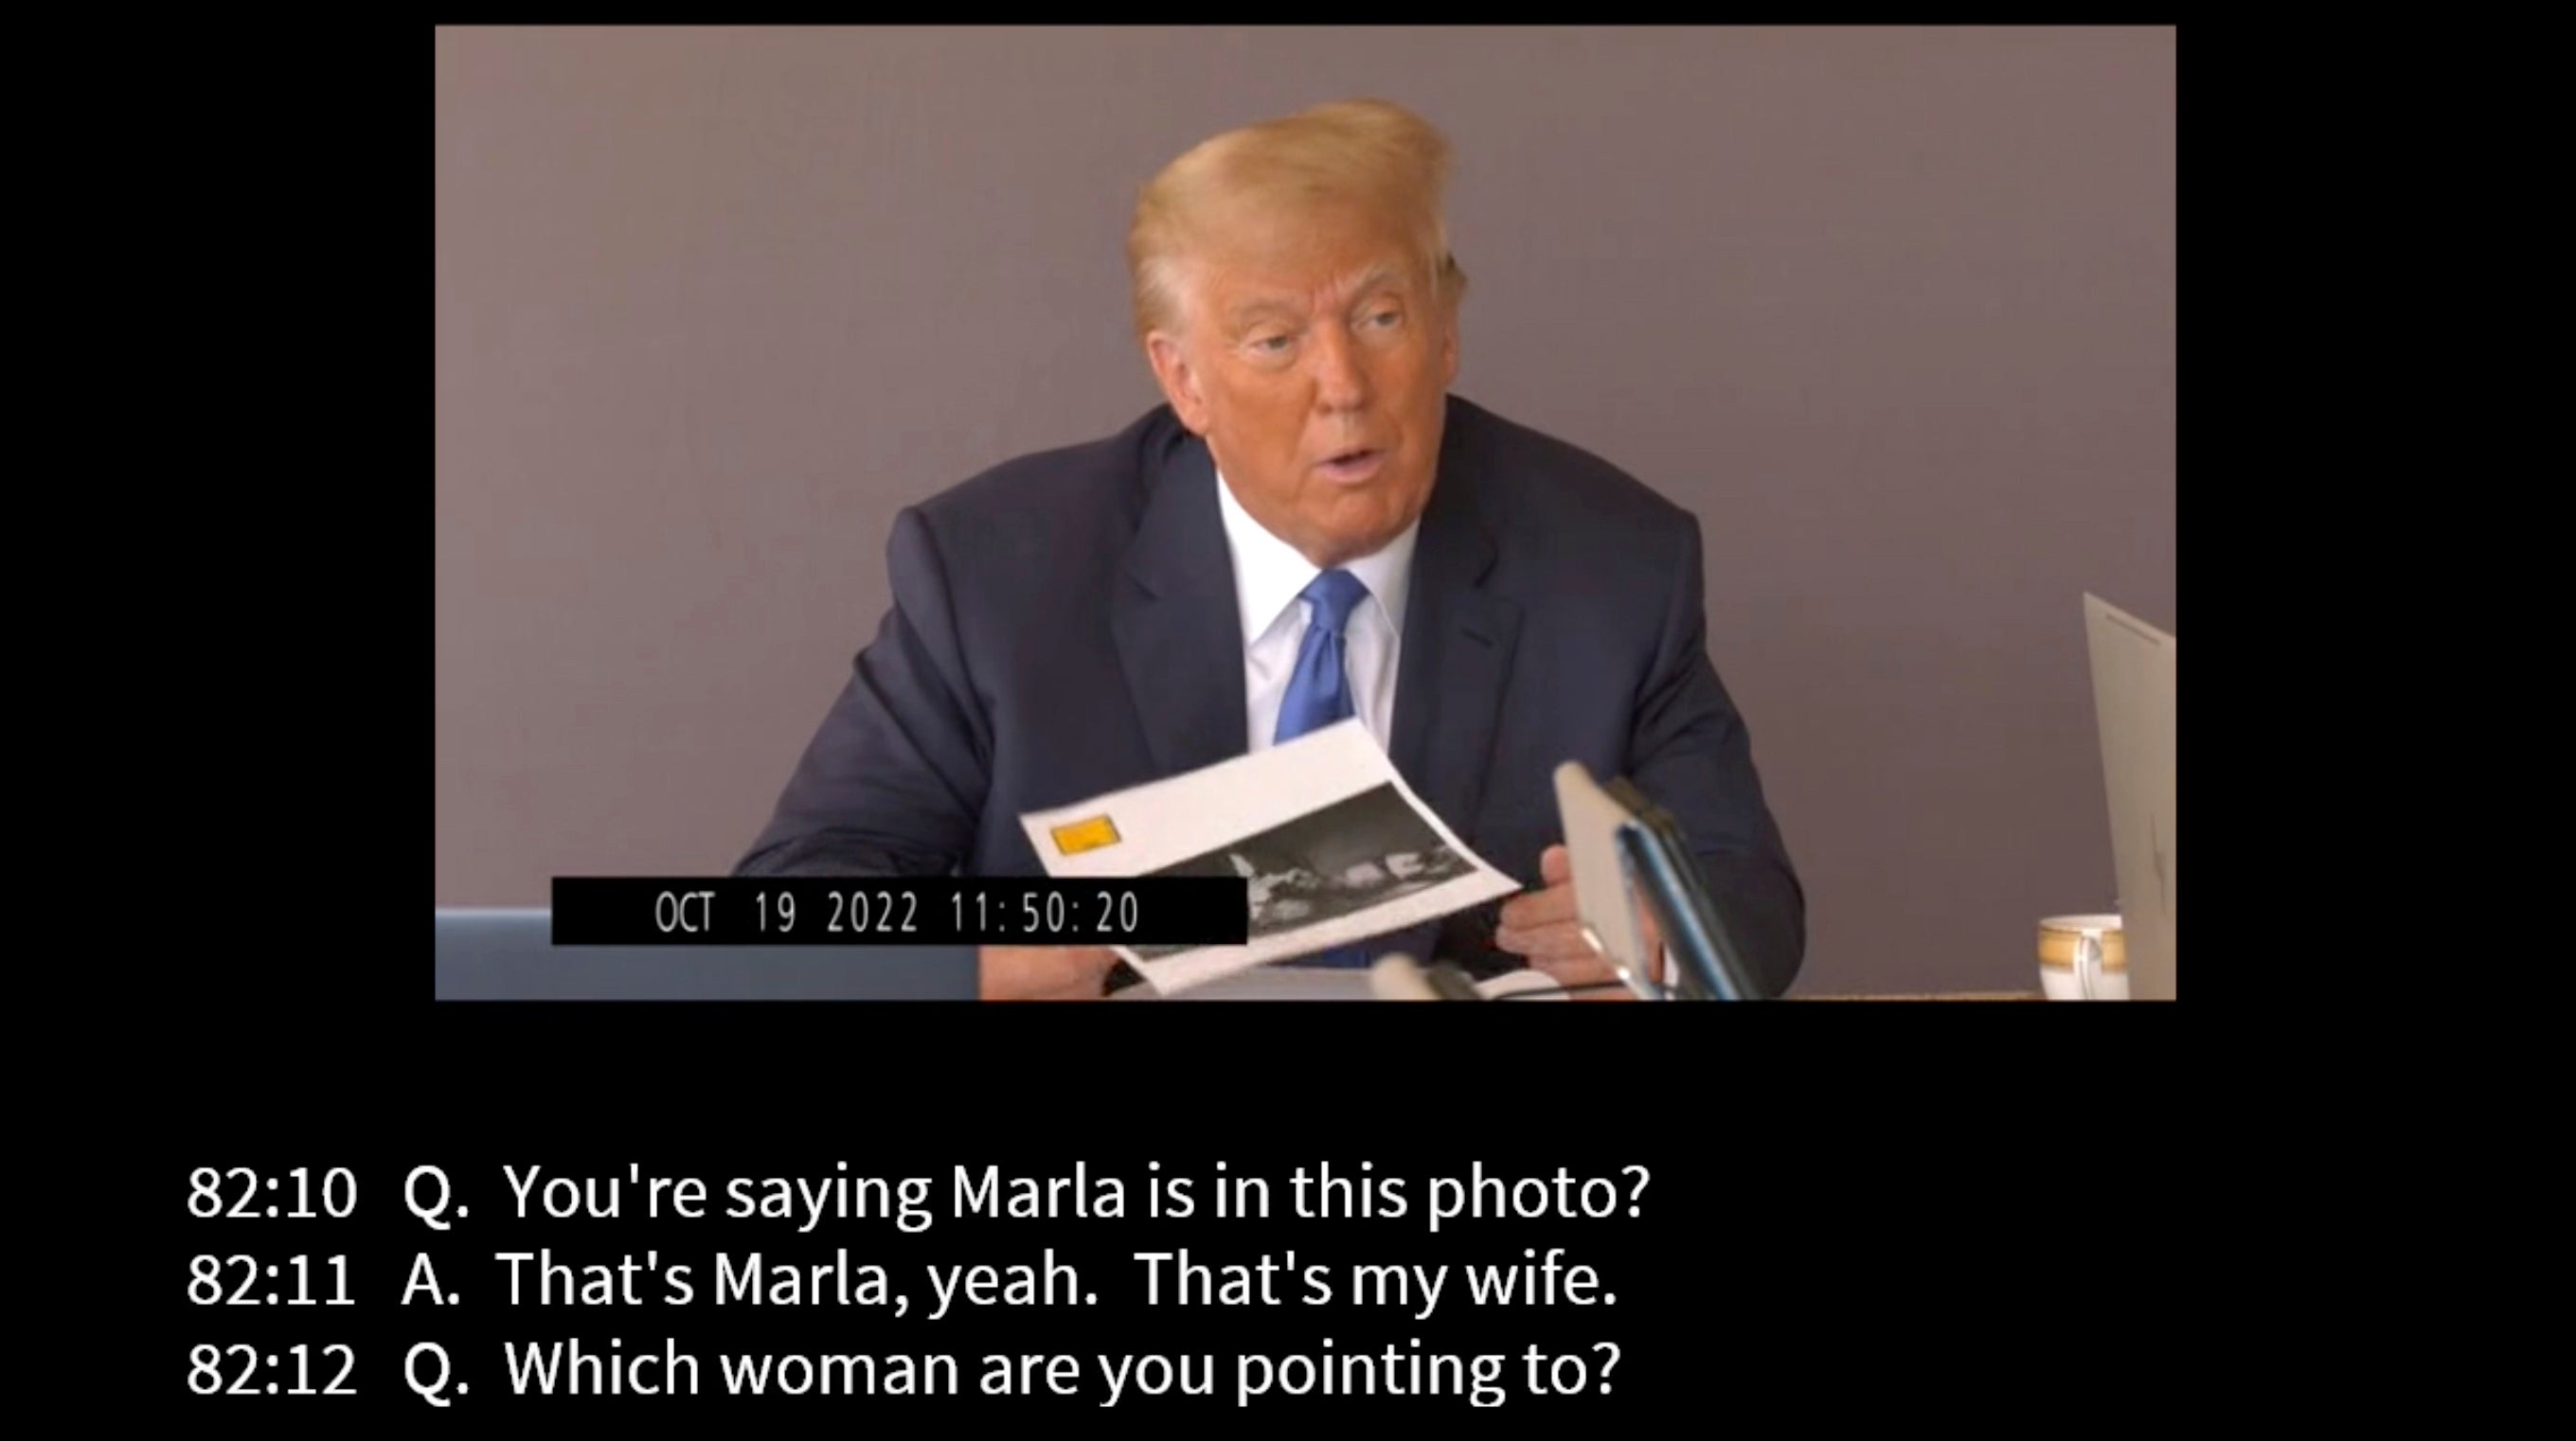 Trump in his deposition for the civil rape trial